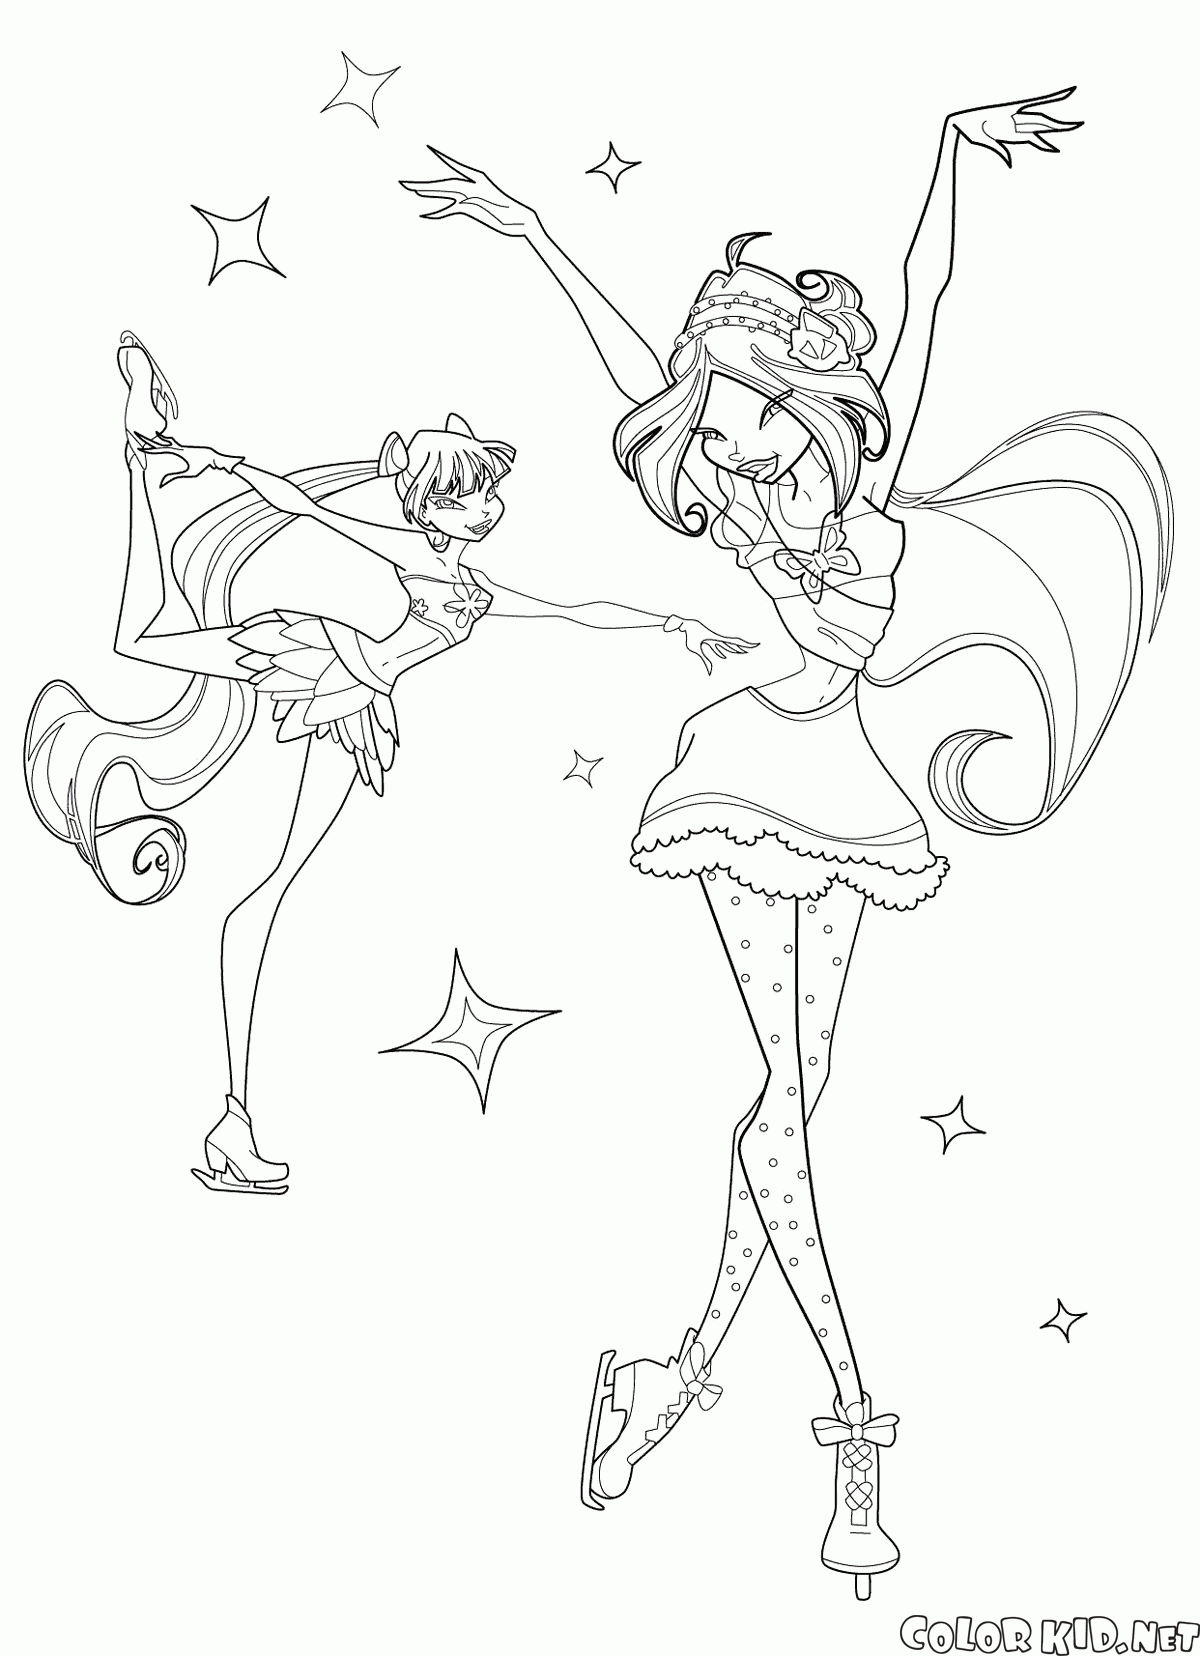 Witches ball dance